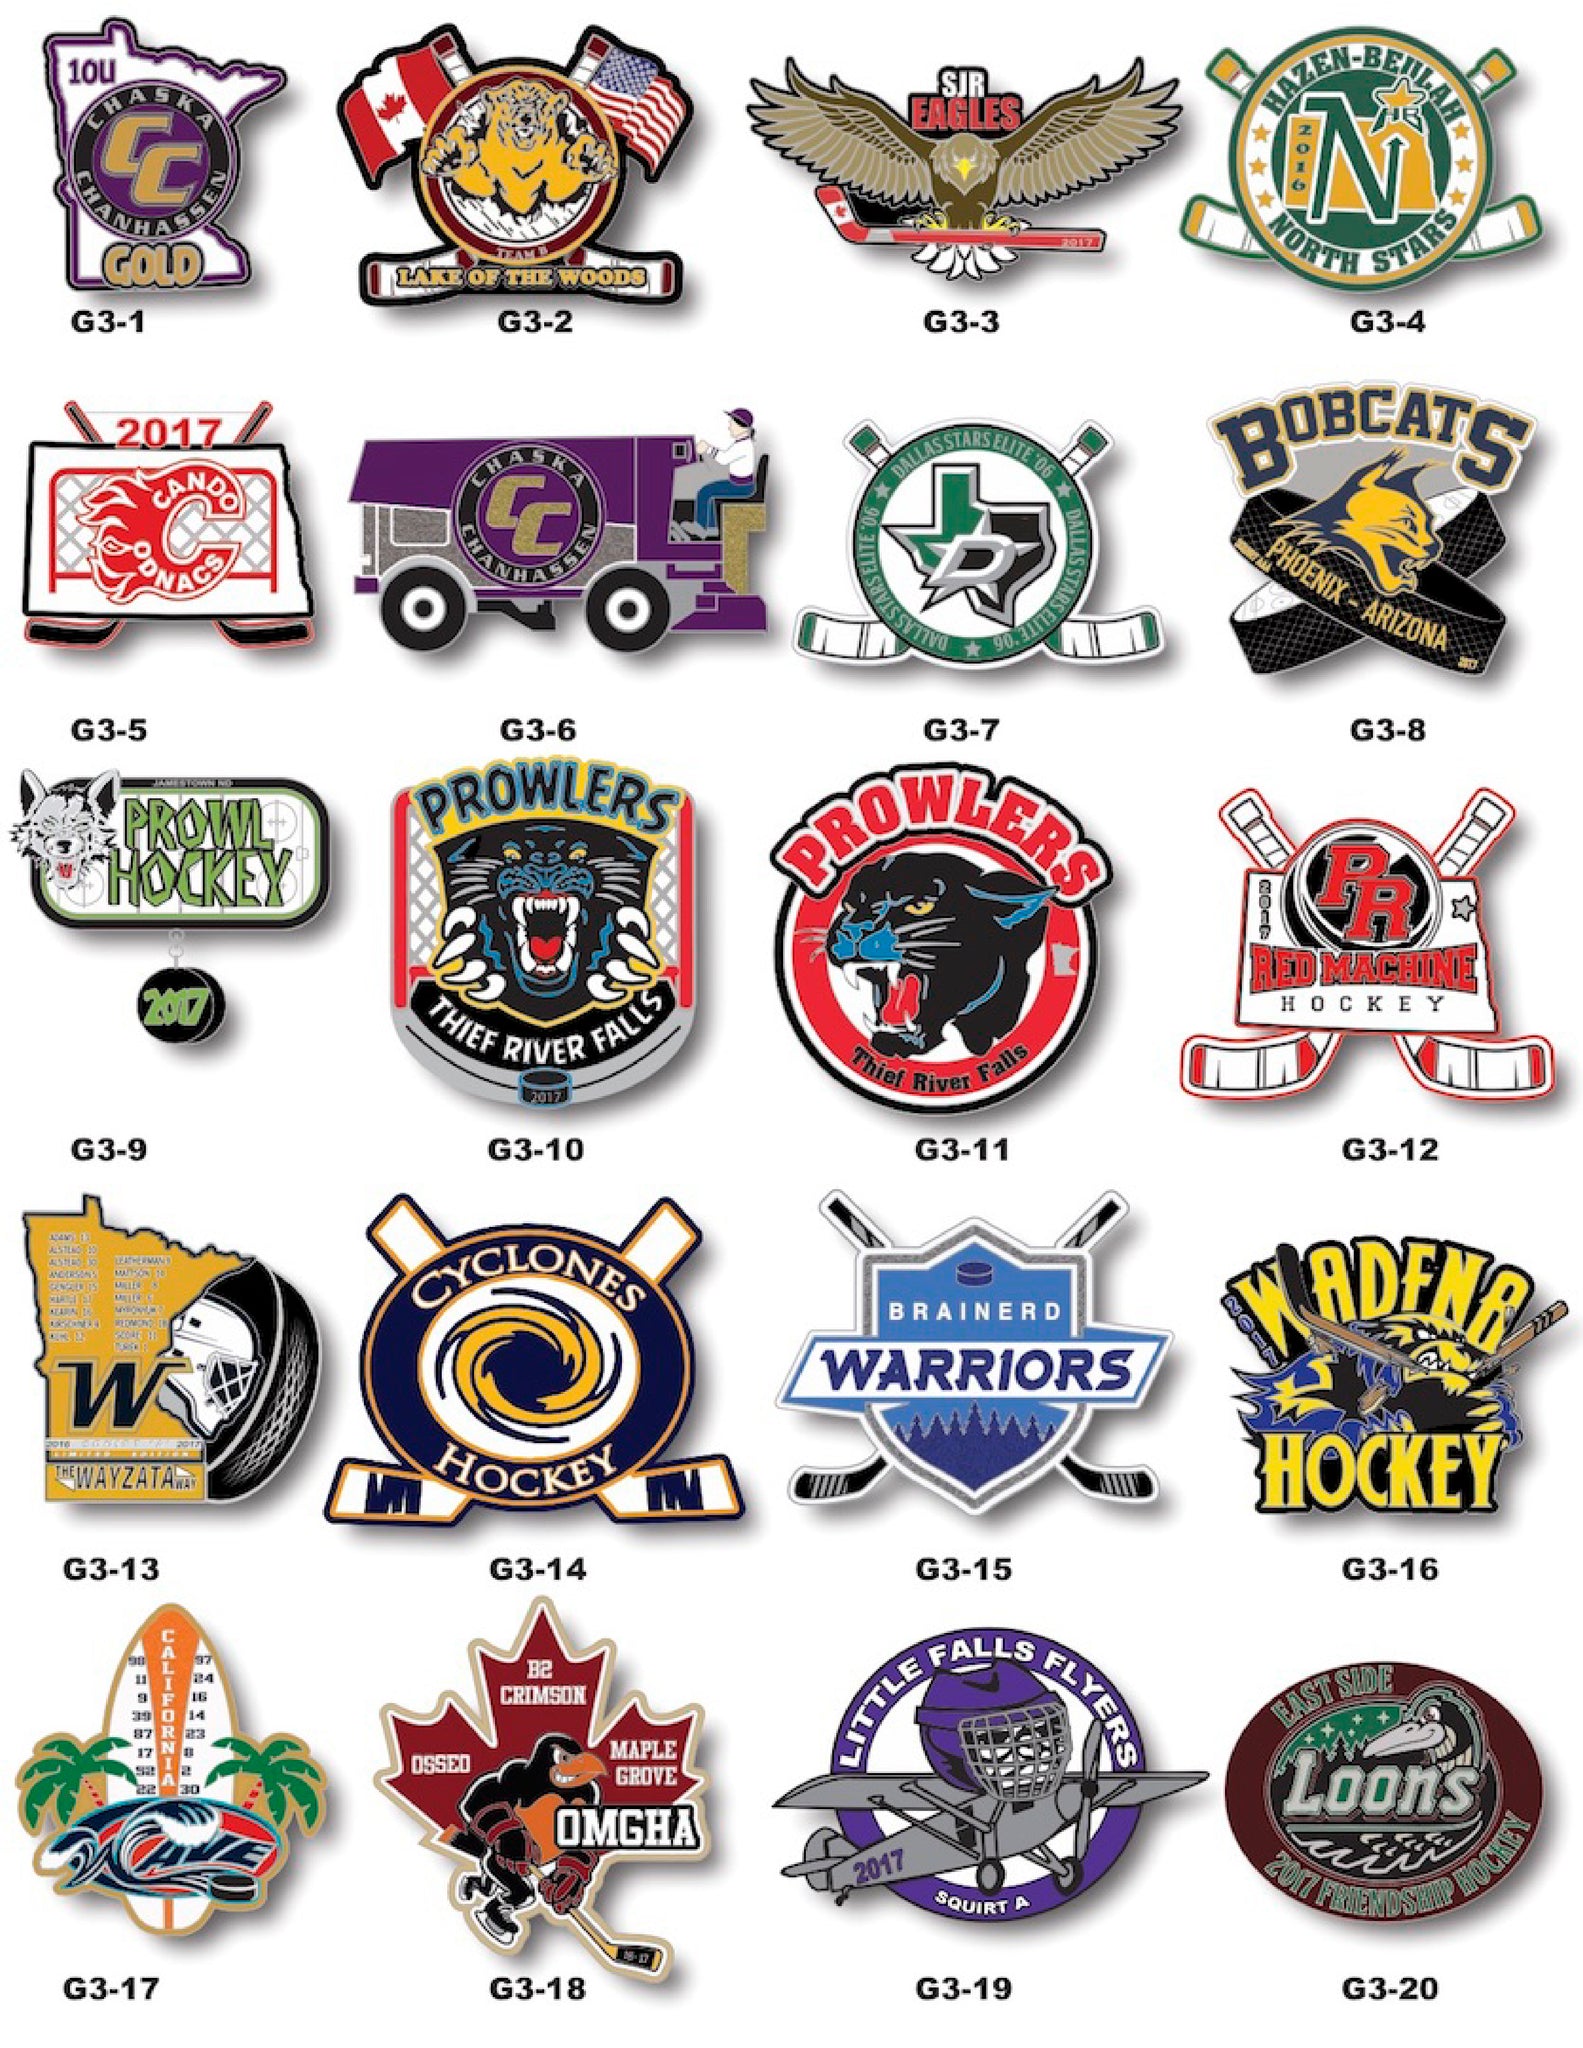 Hockey Trading Pin Gallery #3 - SteelBerry Pins